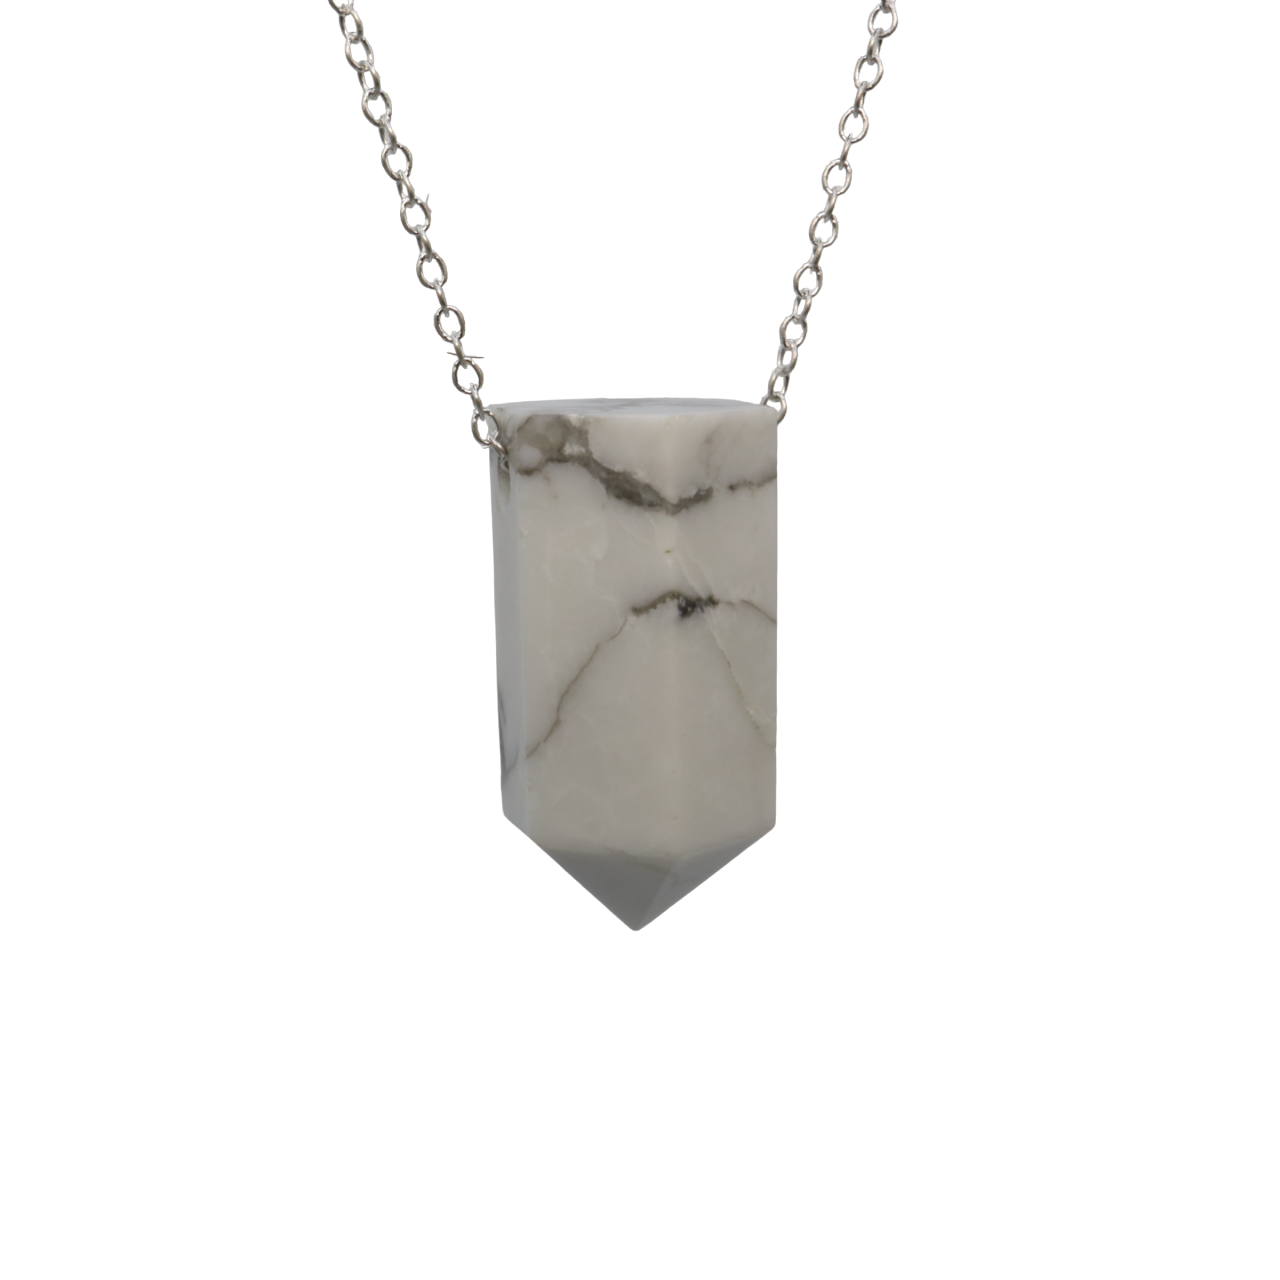 Howlite on a fine 925 Sterling Silver chain